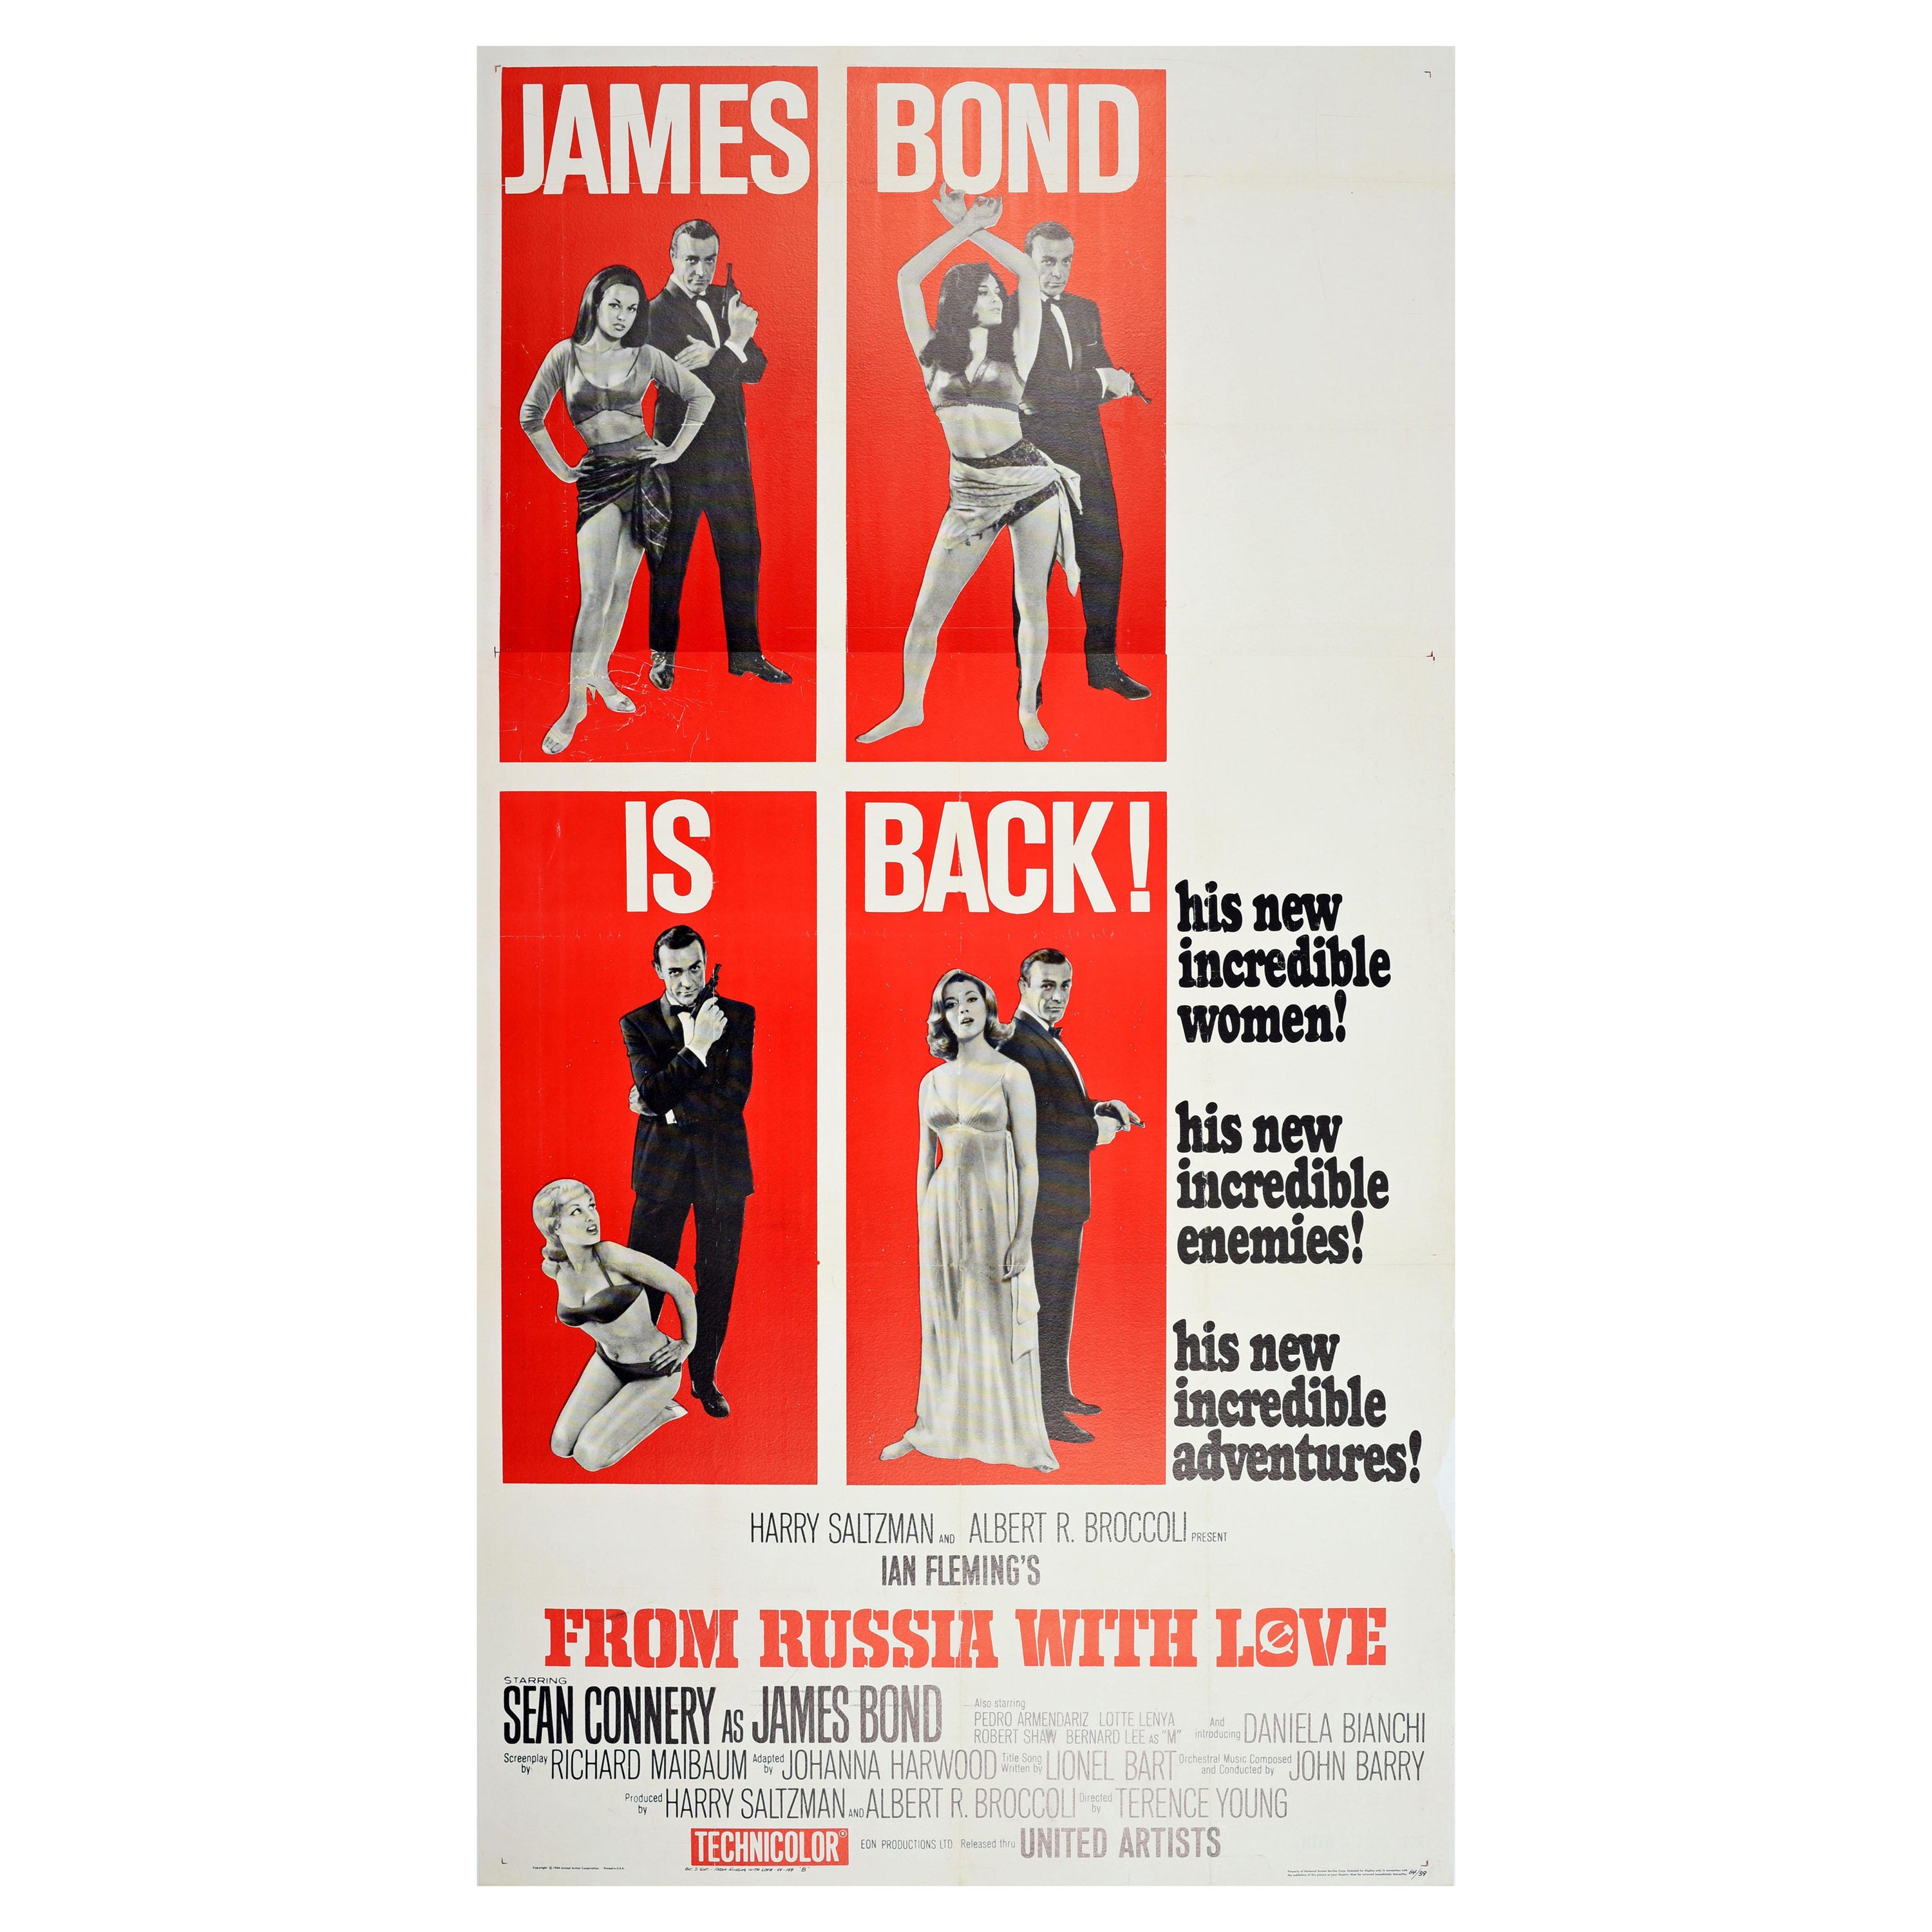 Original Vintage James Bond Poster From Russia With Love Sean Connery 007 Film